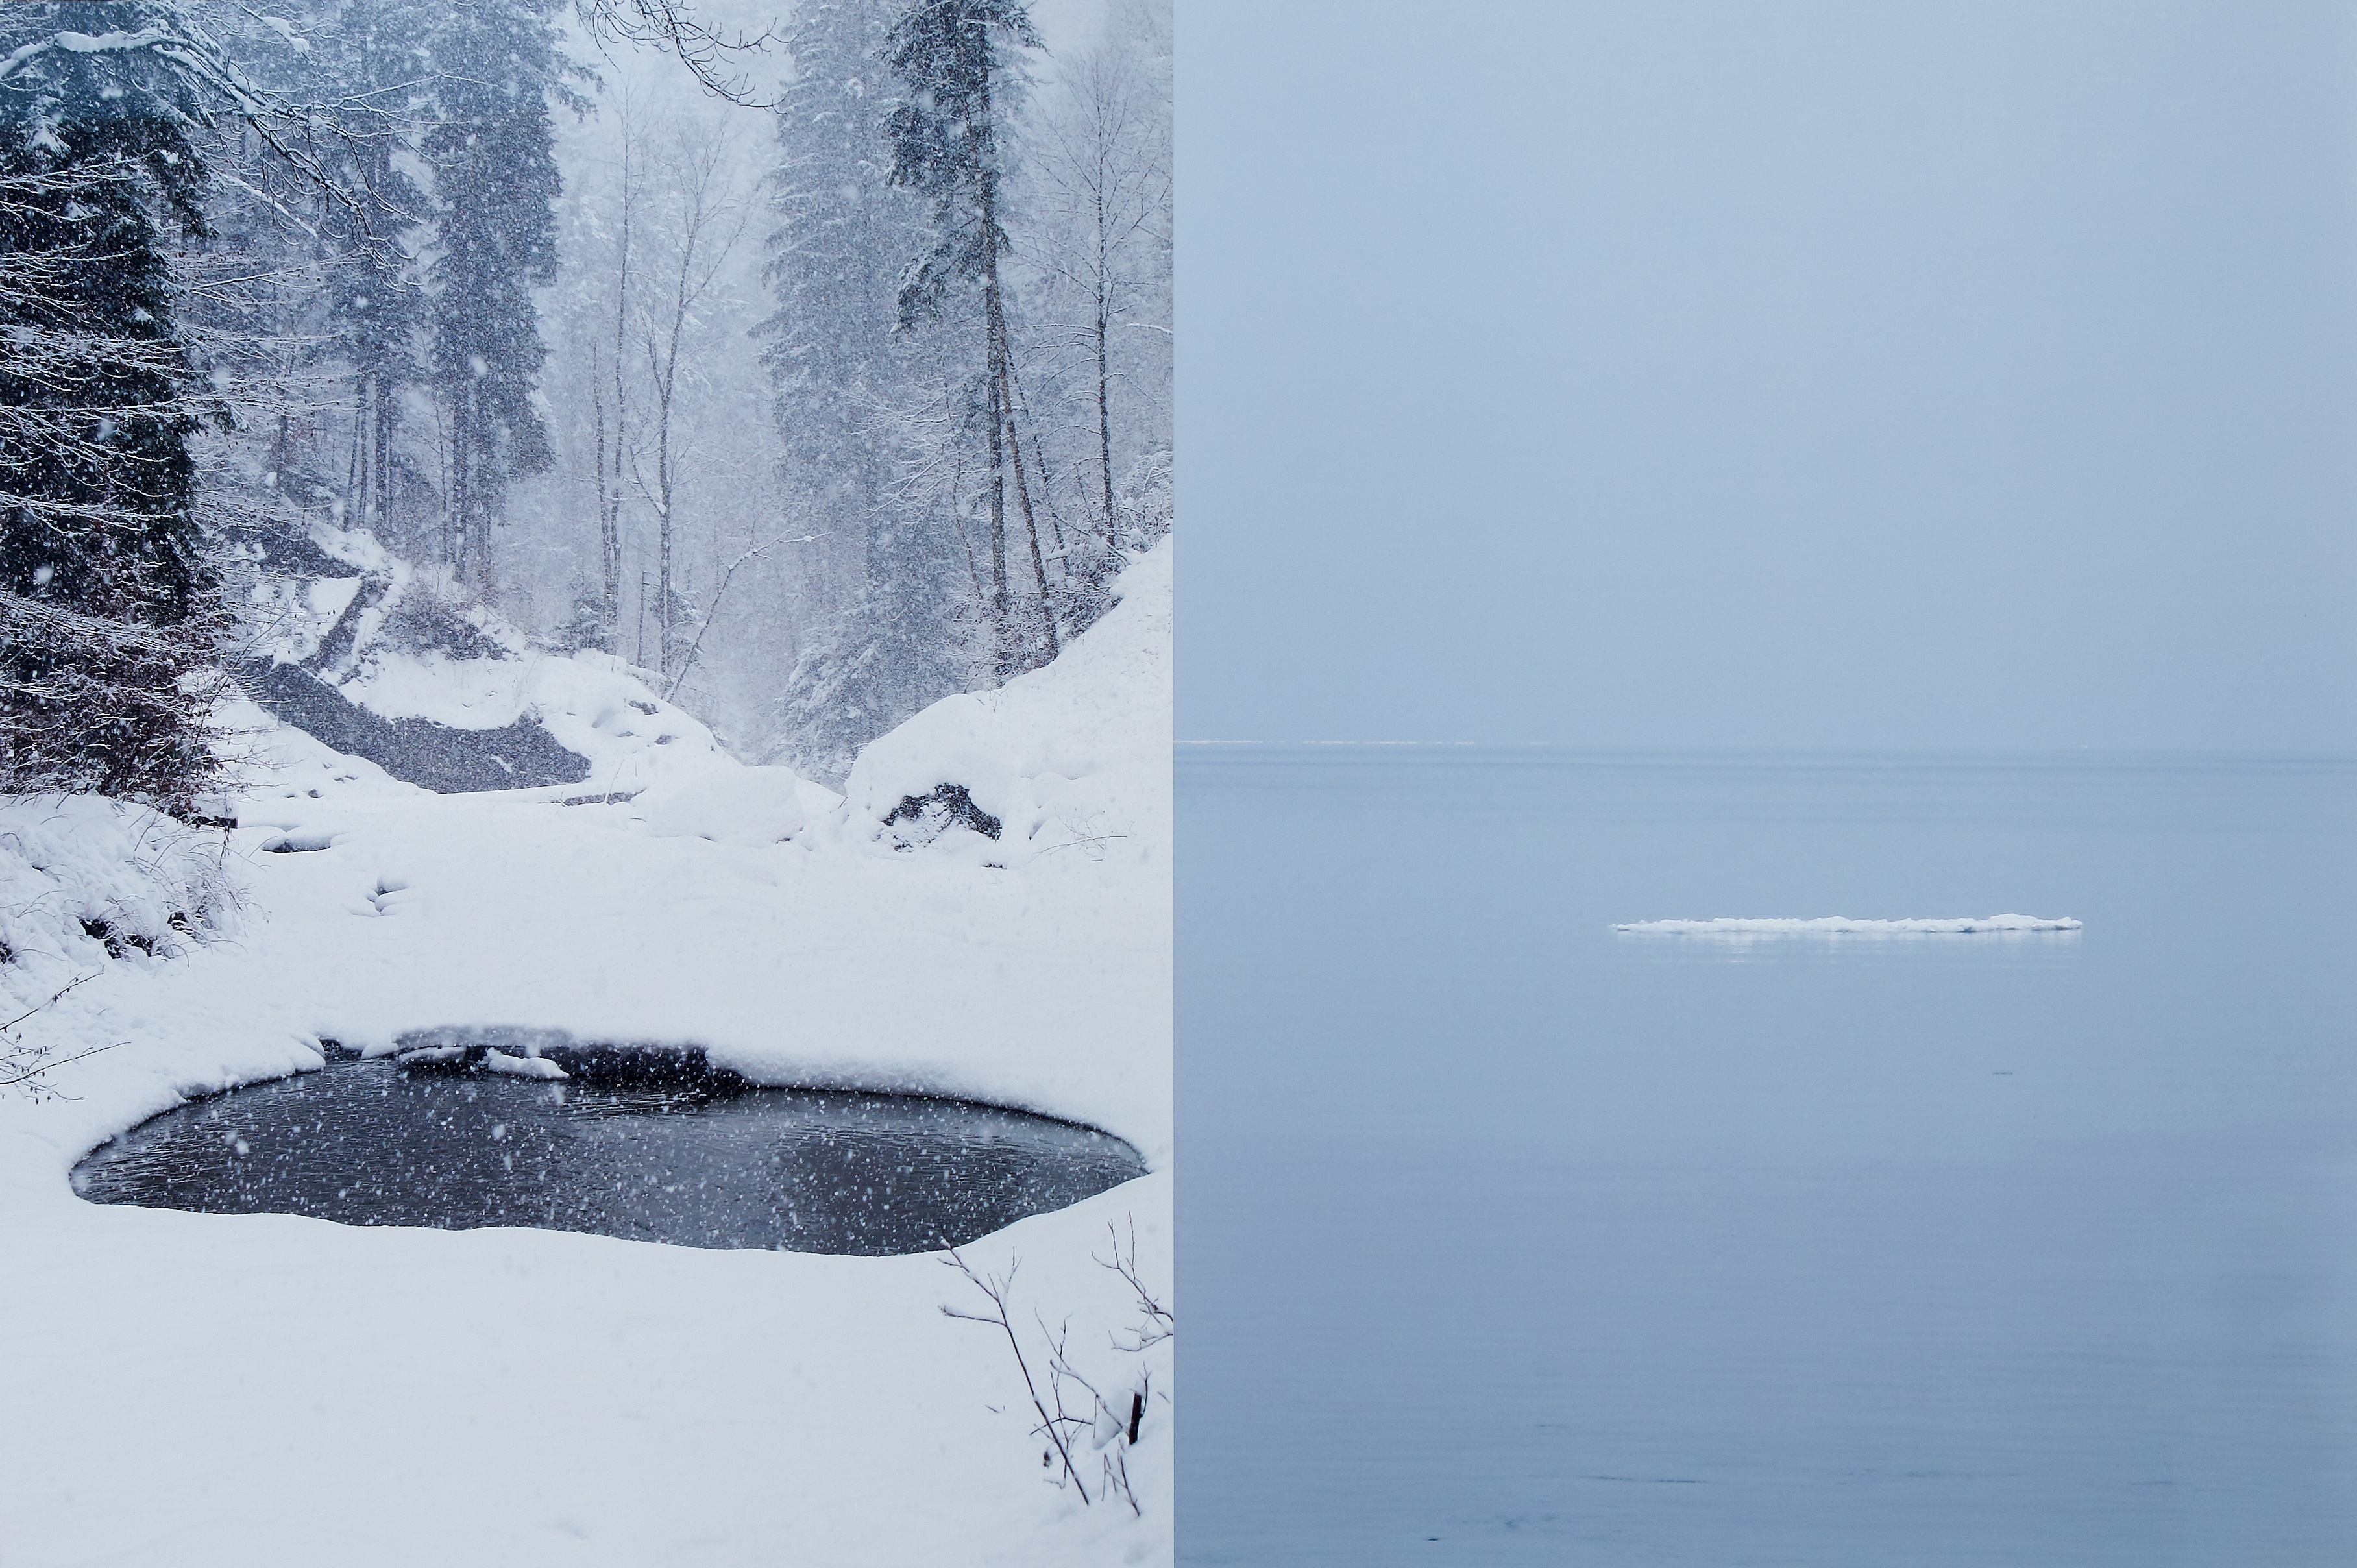 Pond and floe 2015 Lambda Prints on Alu Dibond each 80 x 60 cm by Florian Graf from the Julius Baer Art Collection